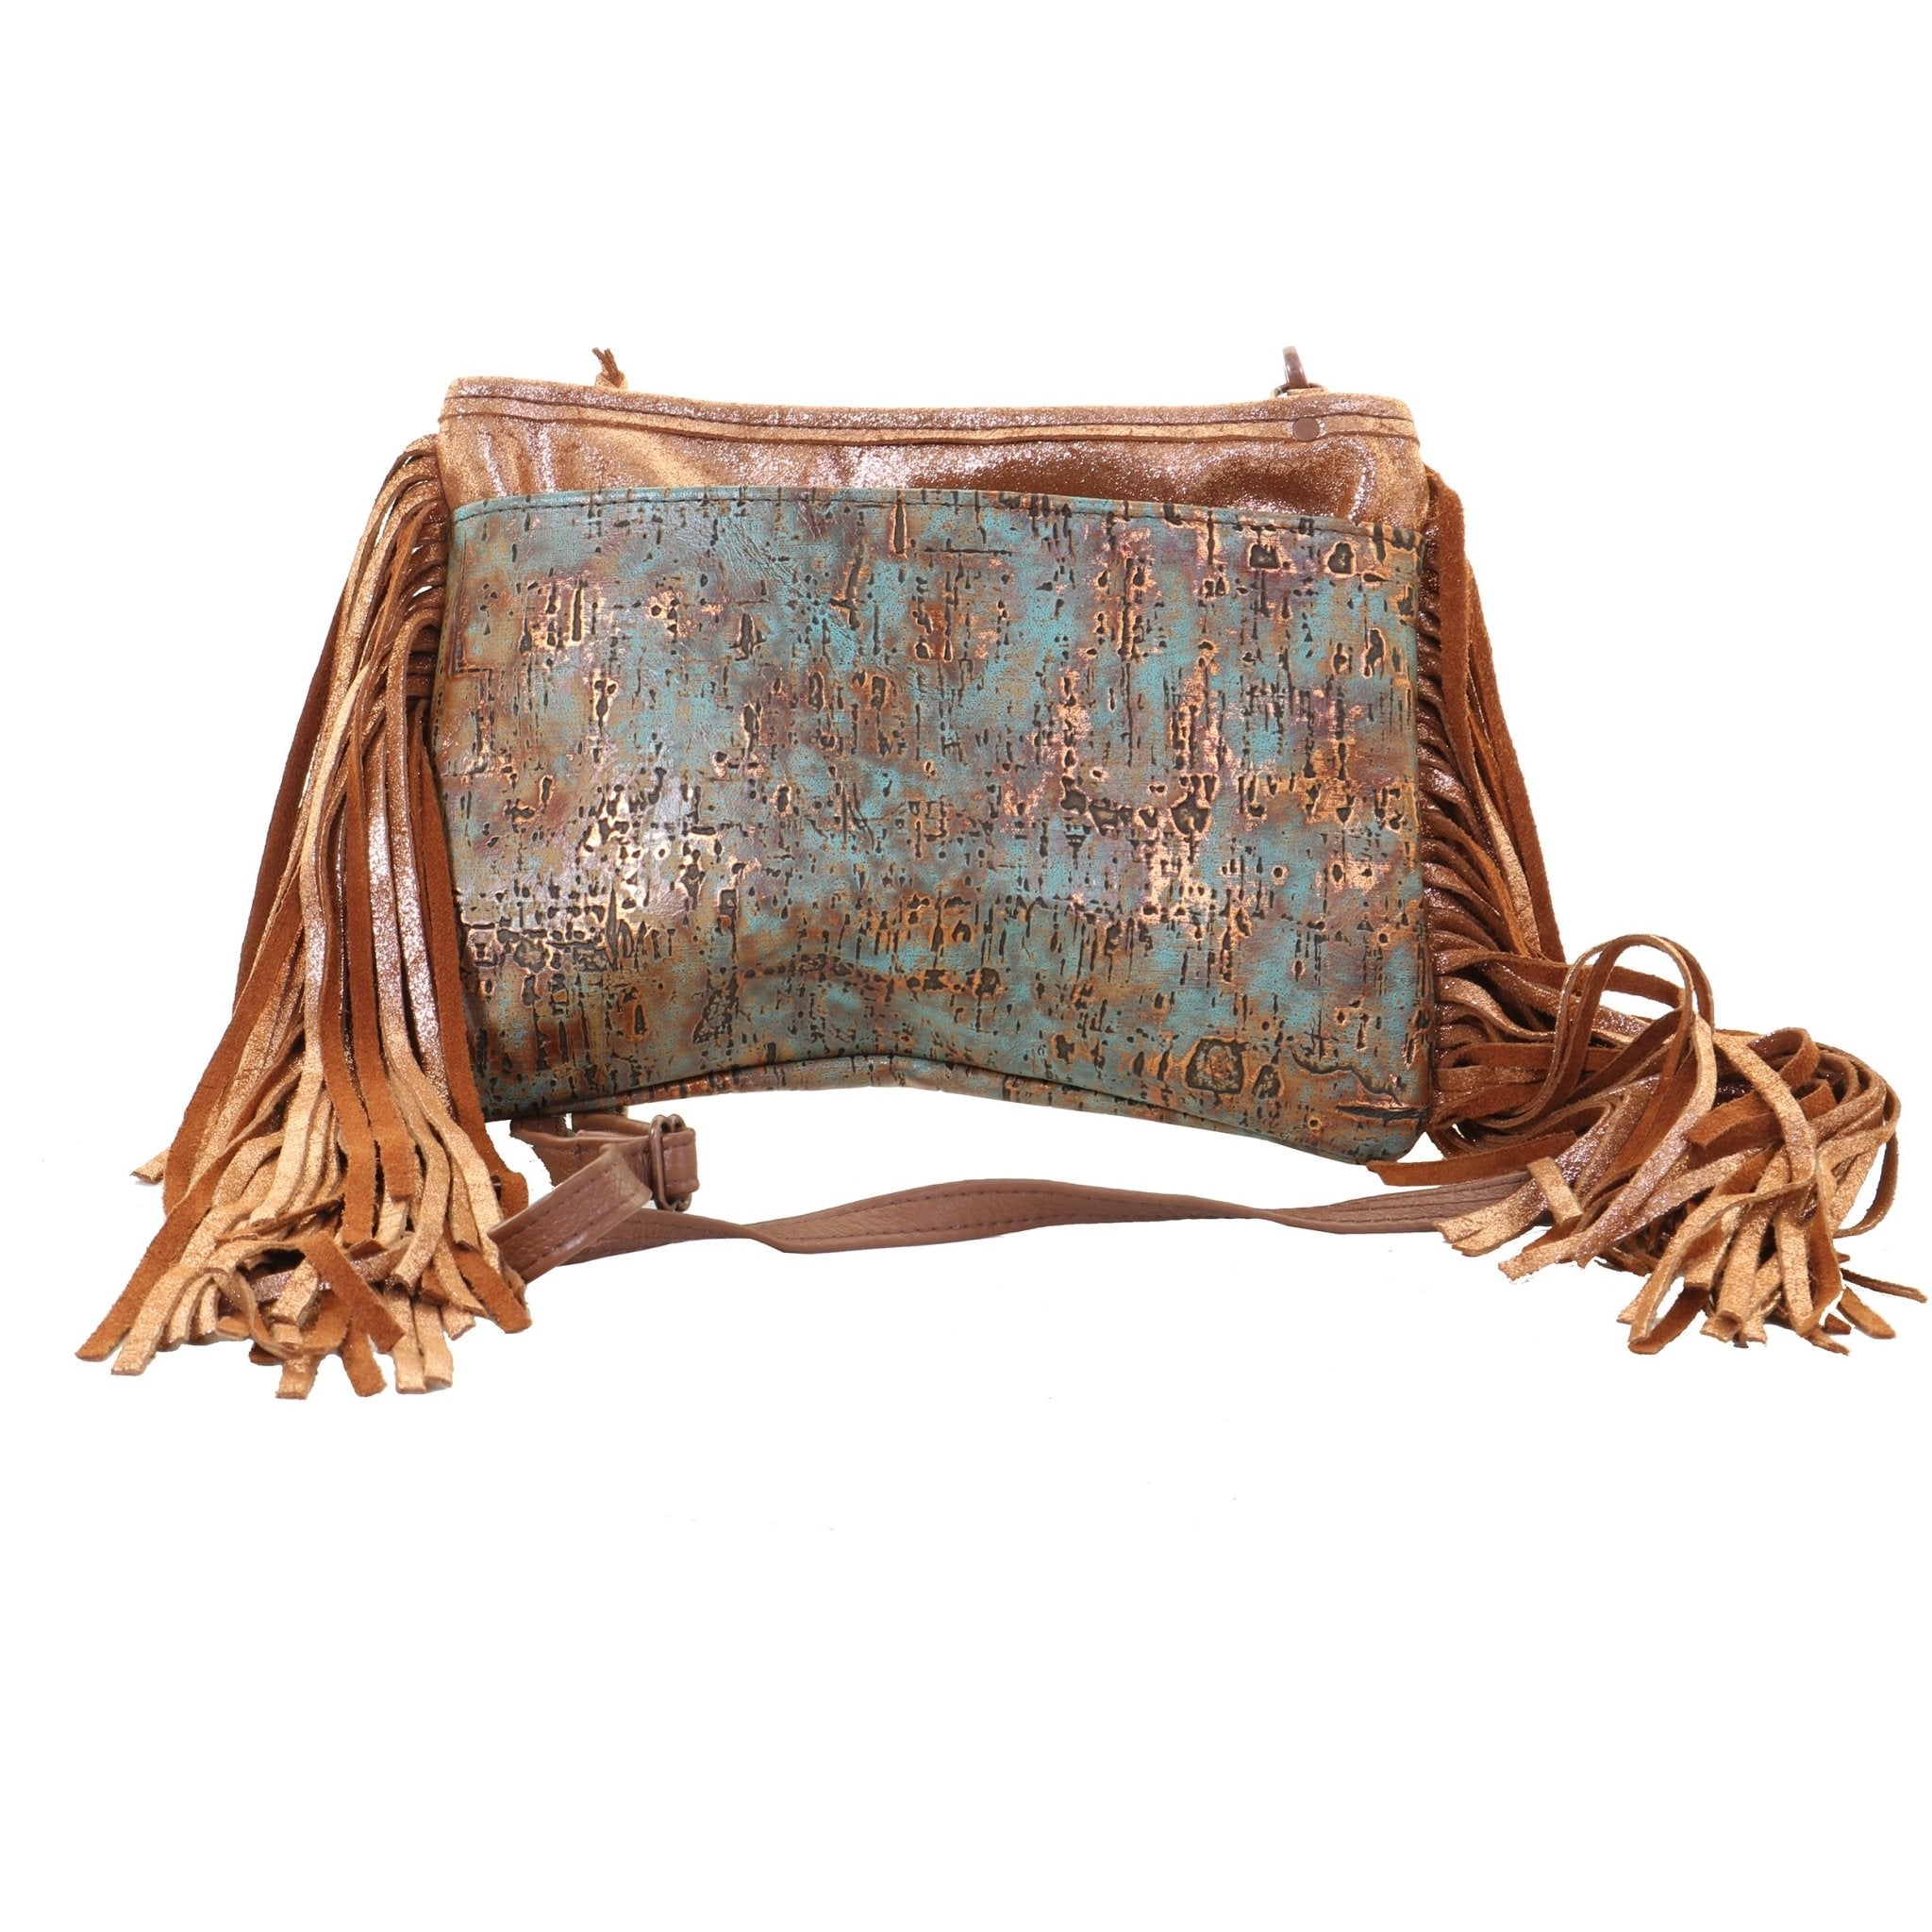 Buy Vintage Brass & Copper Pillow Purse Clutch Online in India - Etsy